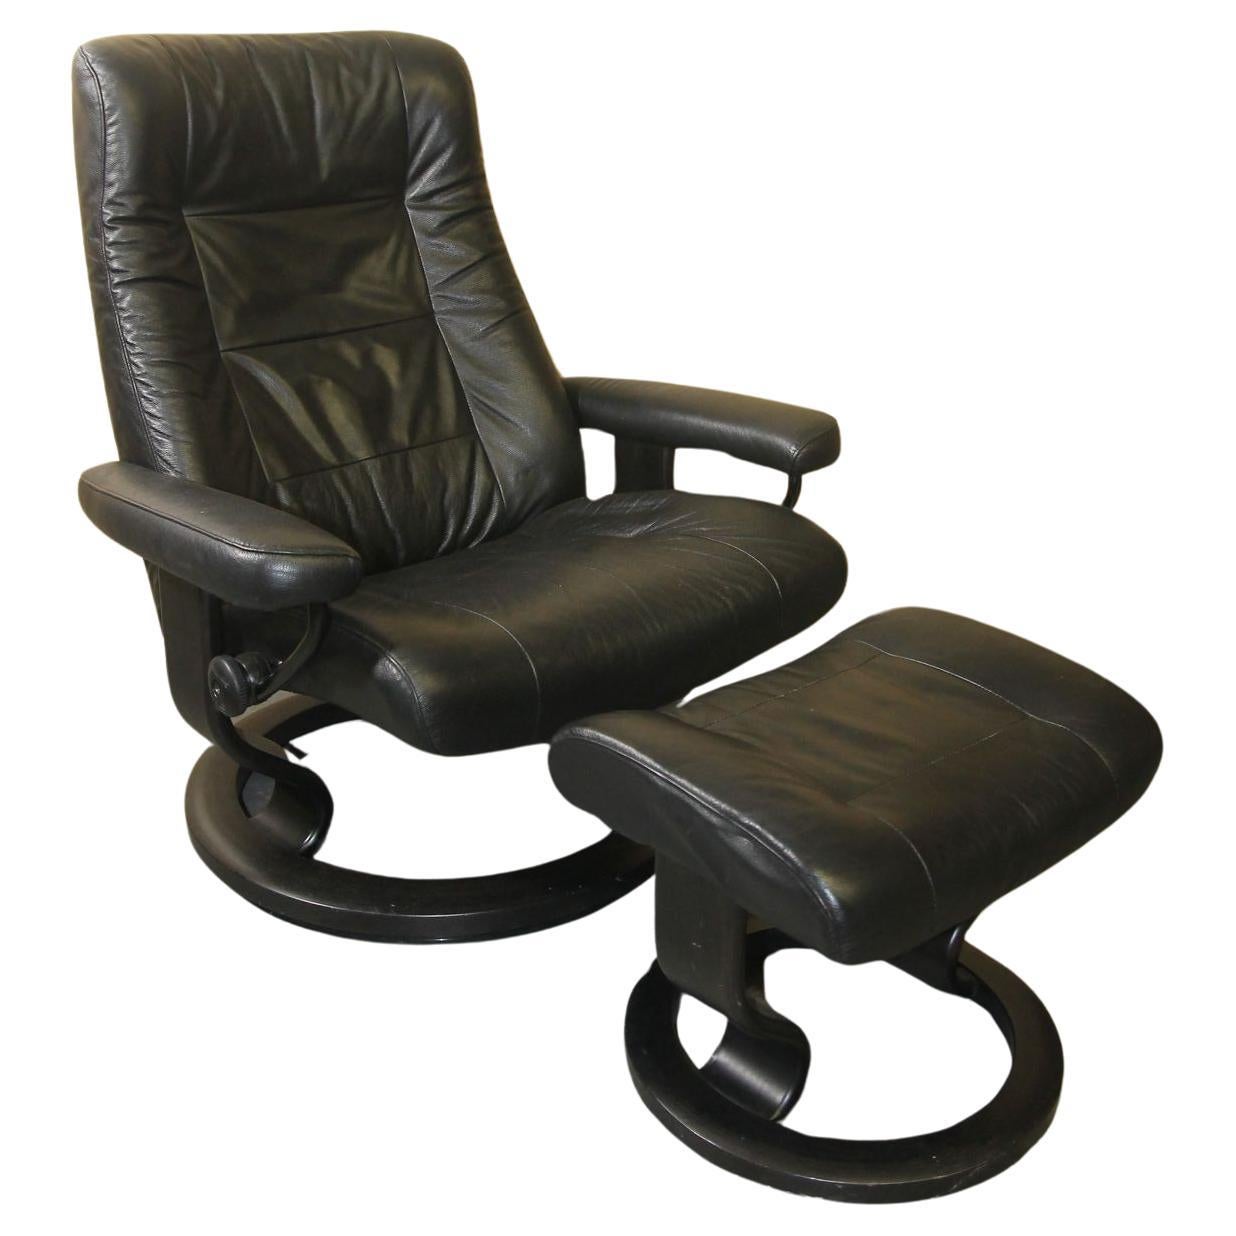 Ekornes Stressless Chair and Ottoman For Sale